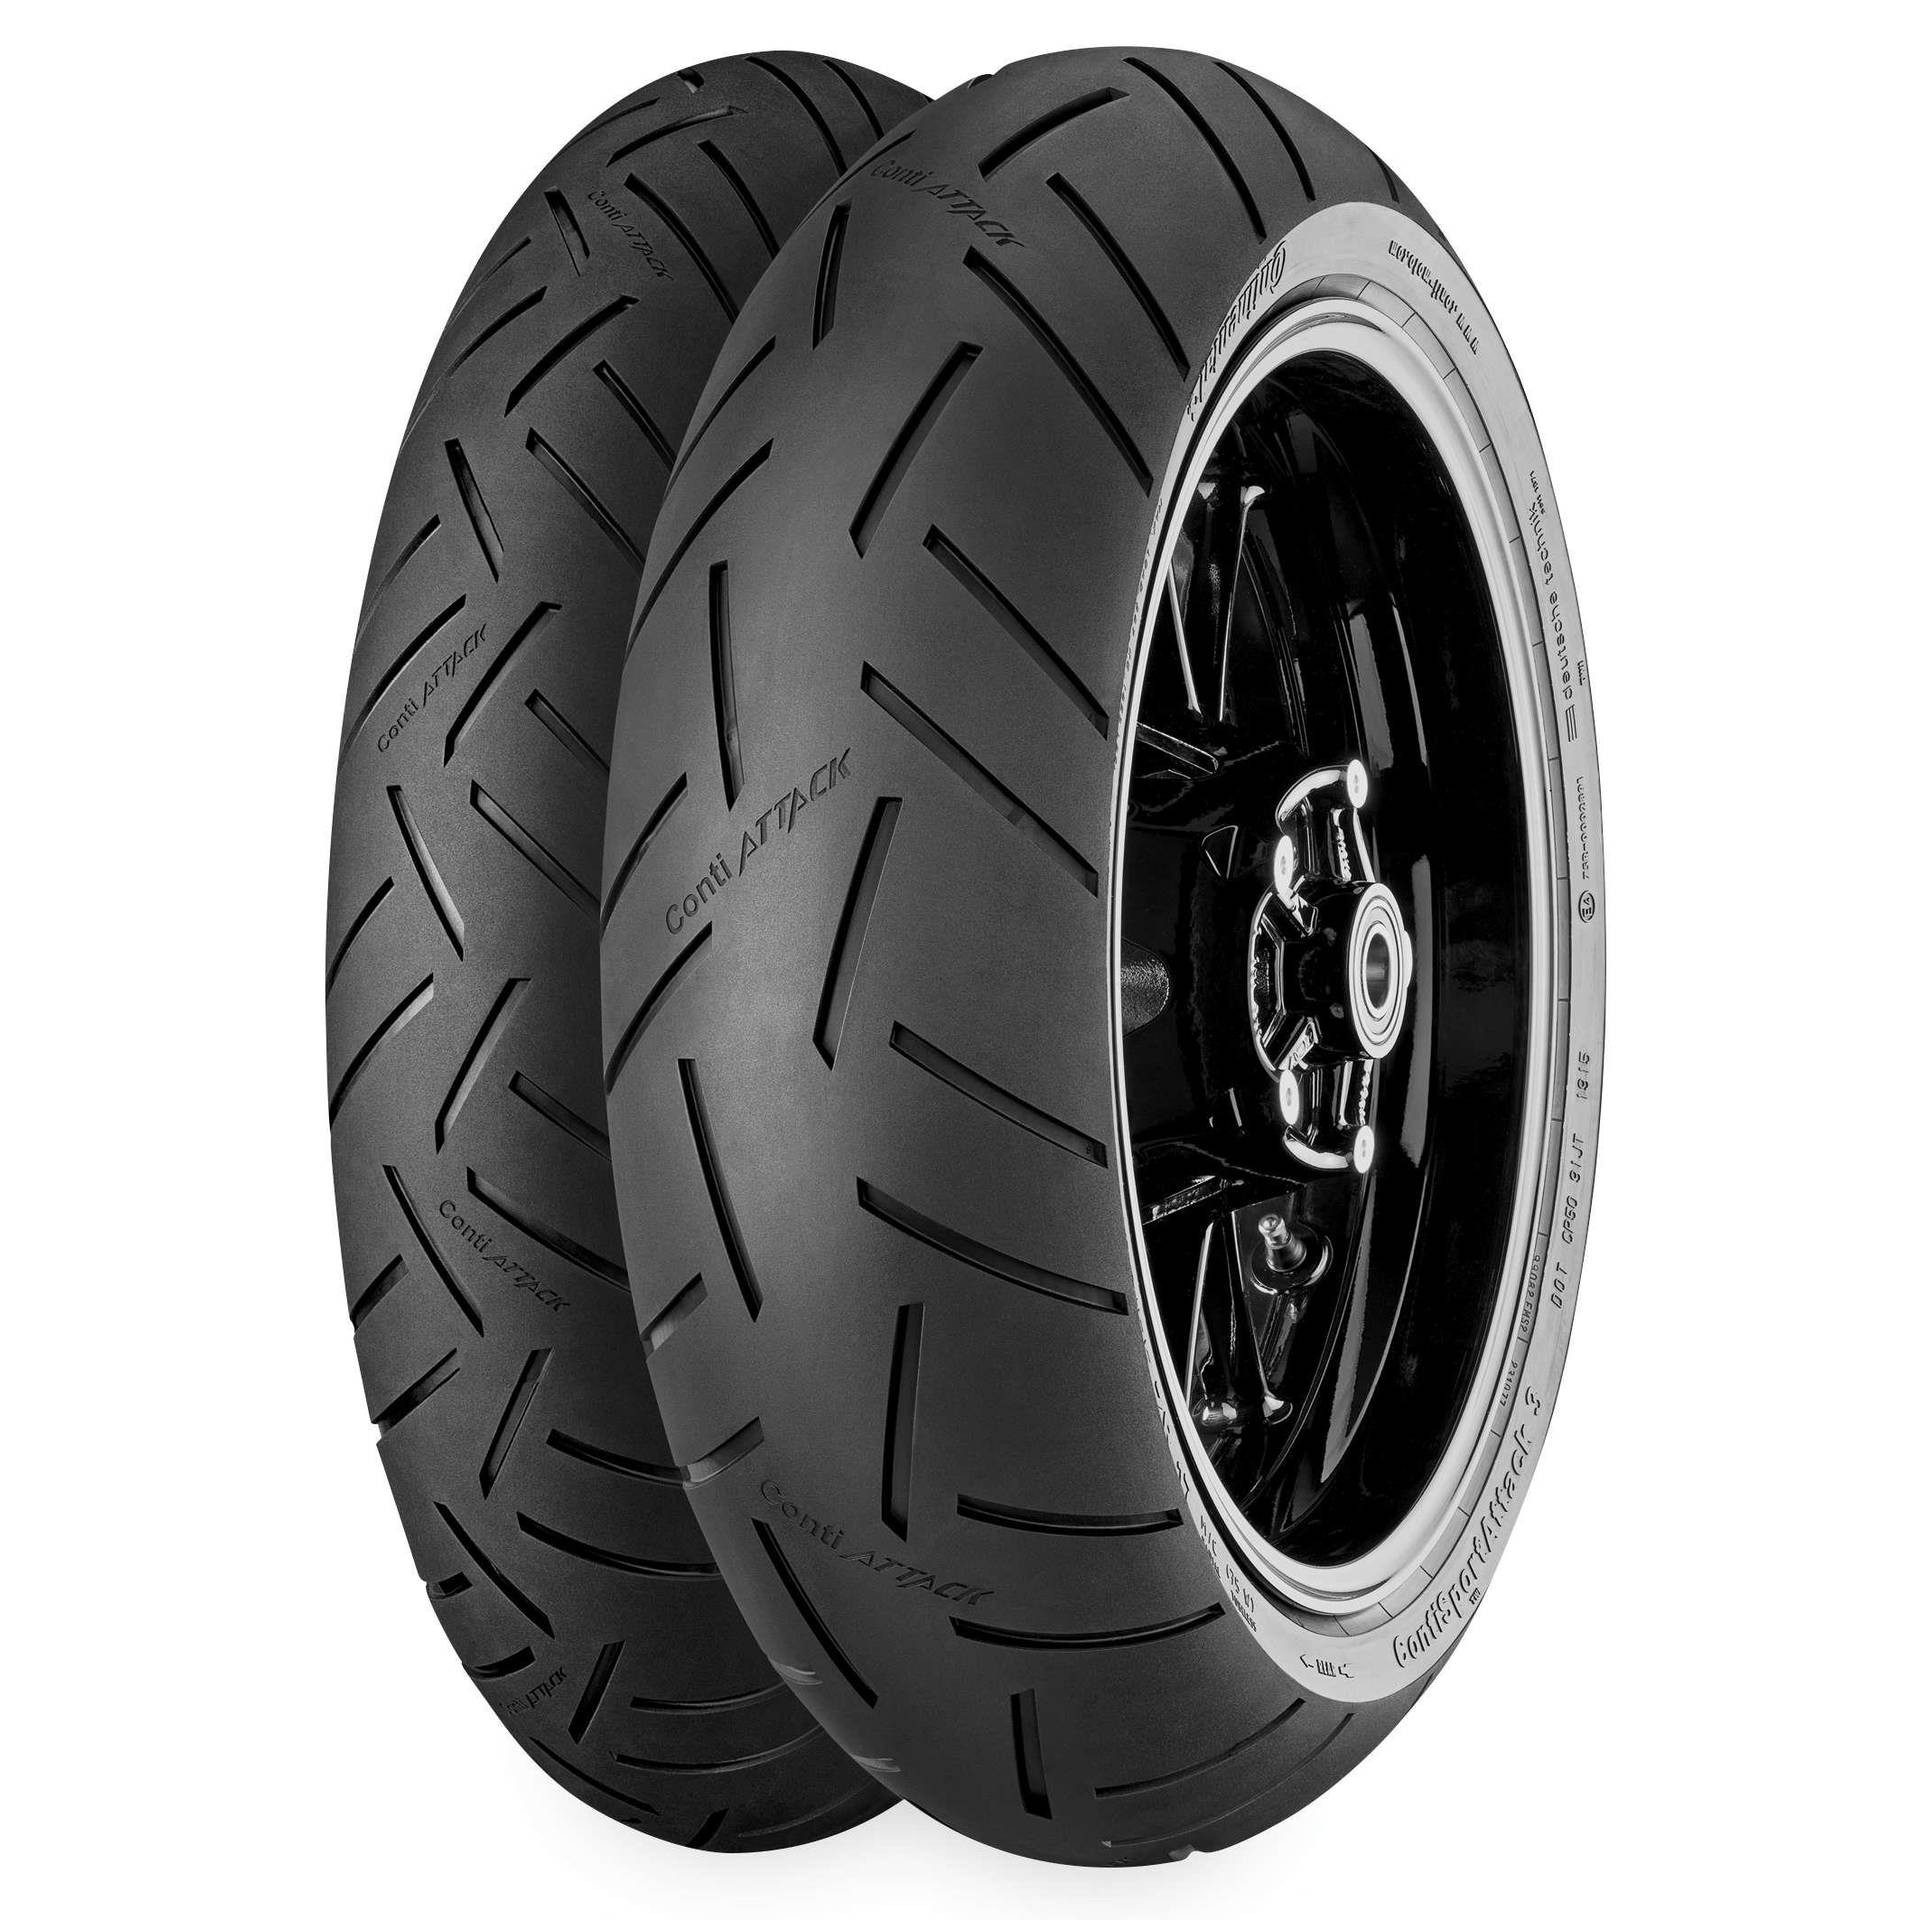 Continental Conti Sport Attack 3 Rear Tire - Motorcycle Tires - Motorcycle | FortNine Canada